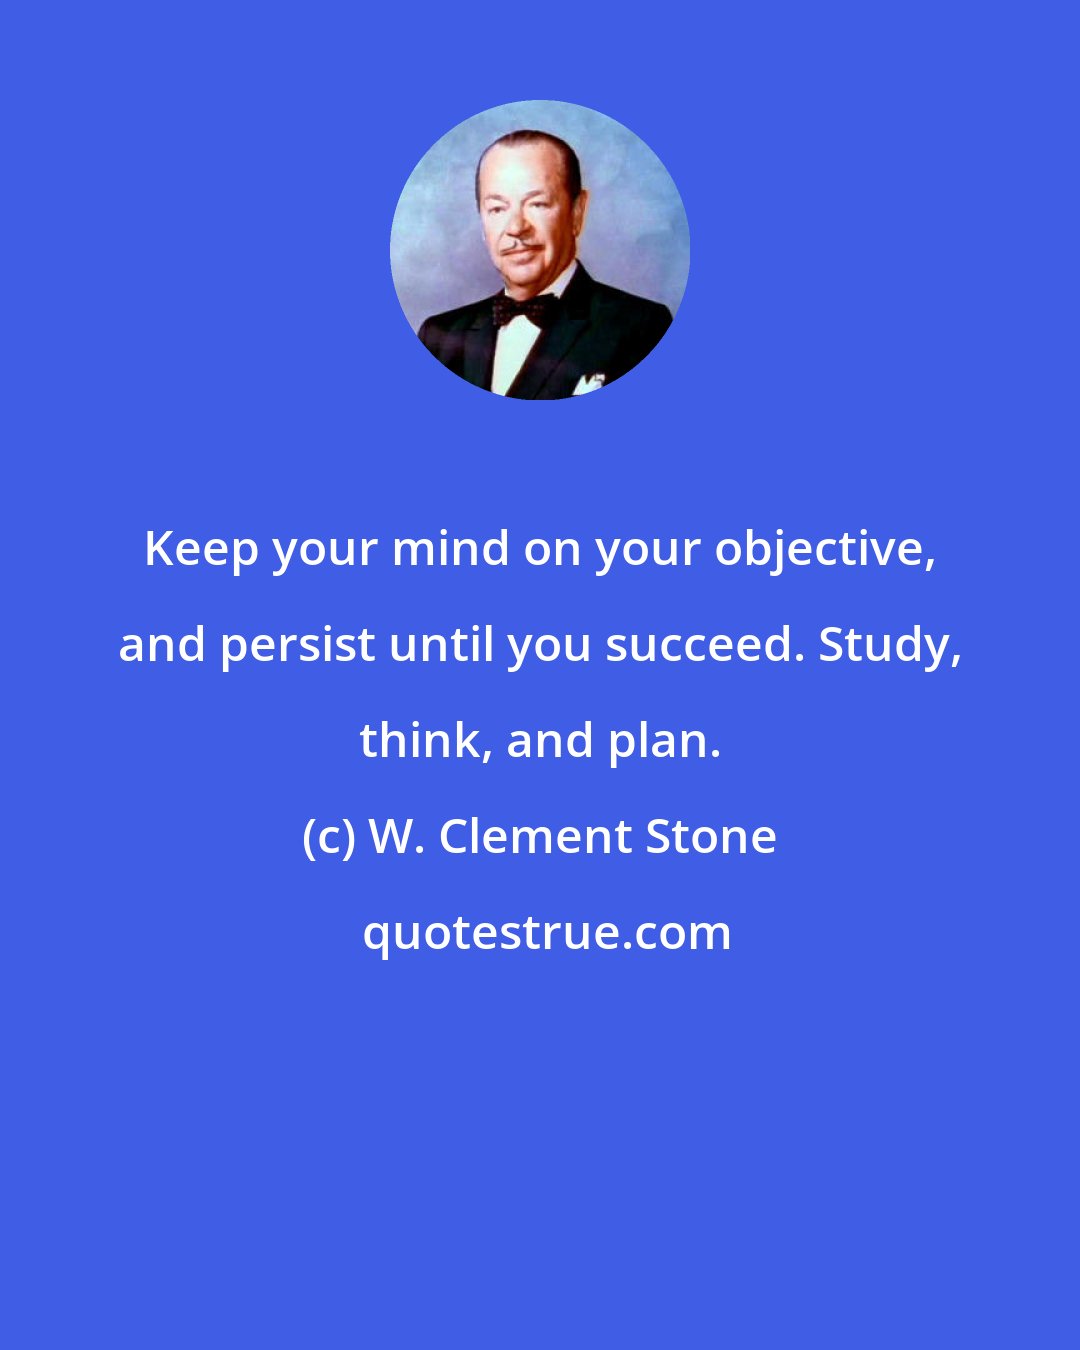 W. Clement Stone: Keep your mind on your objective, and persist until you succeed. Study, think, and plan.